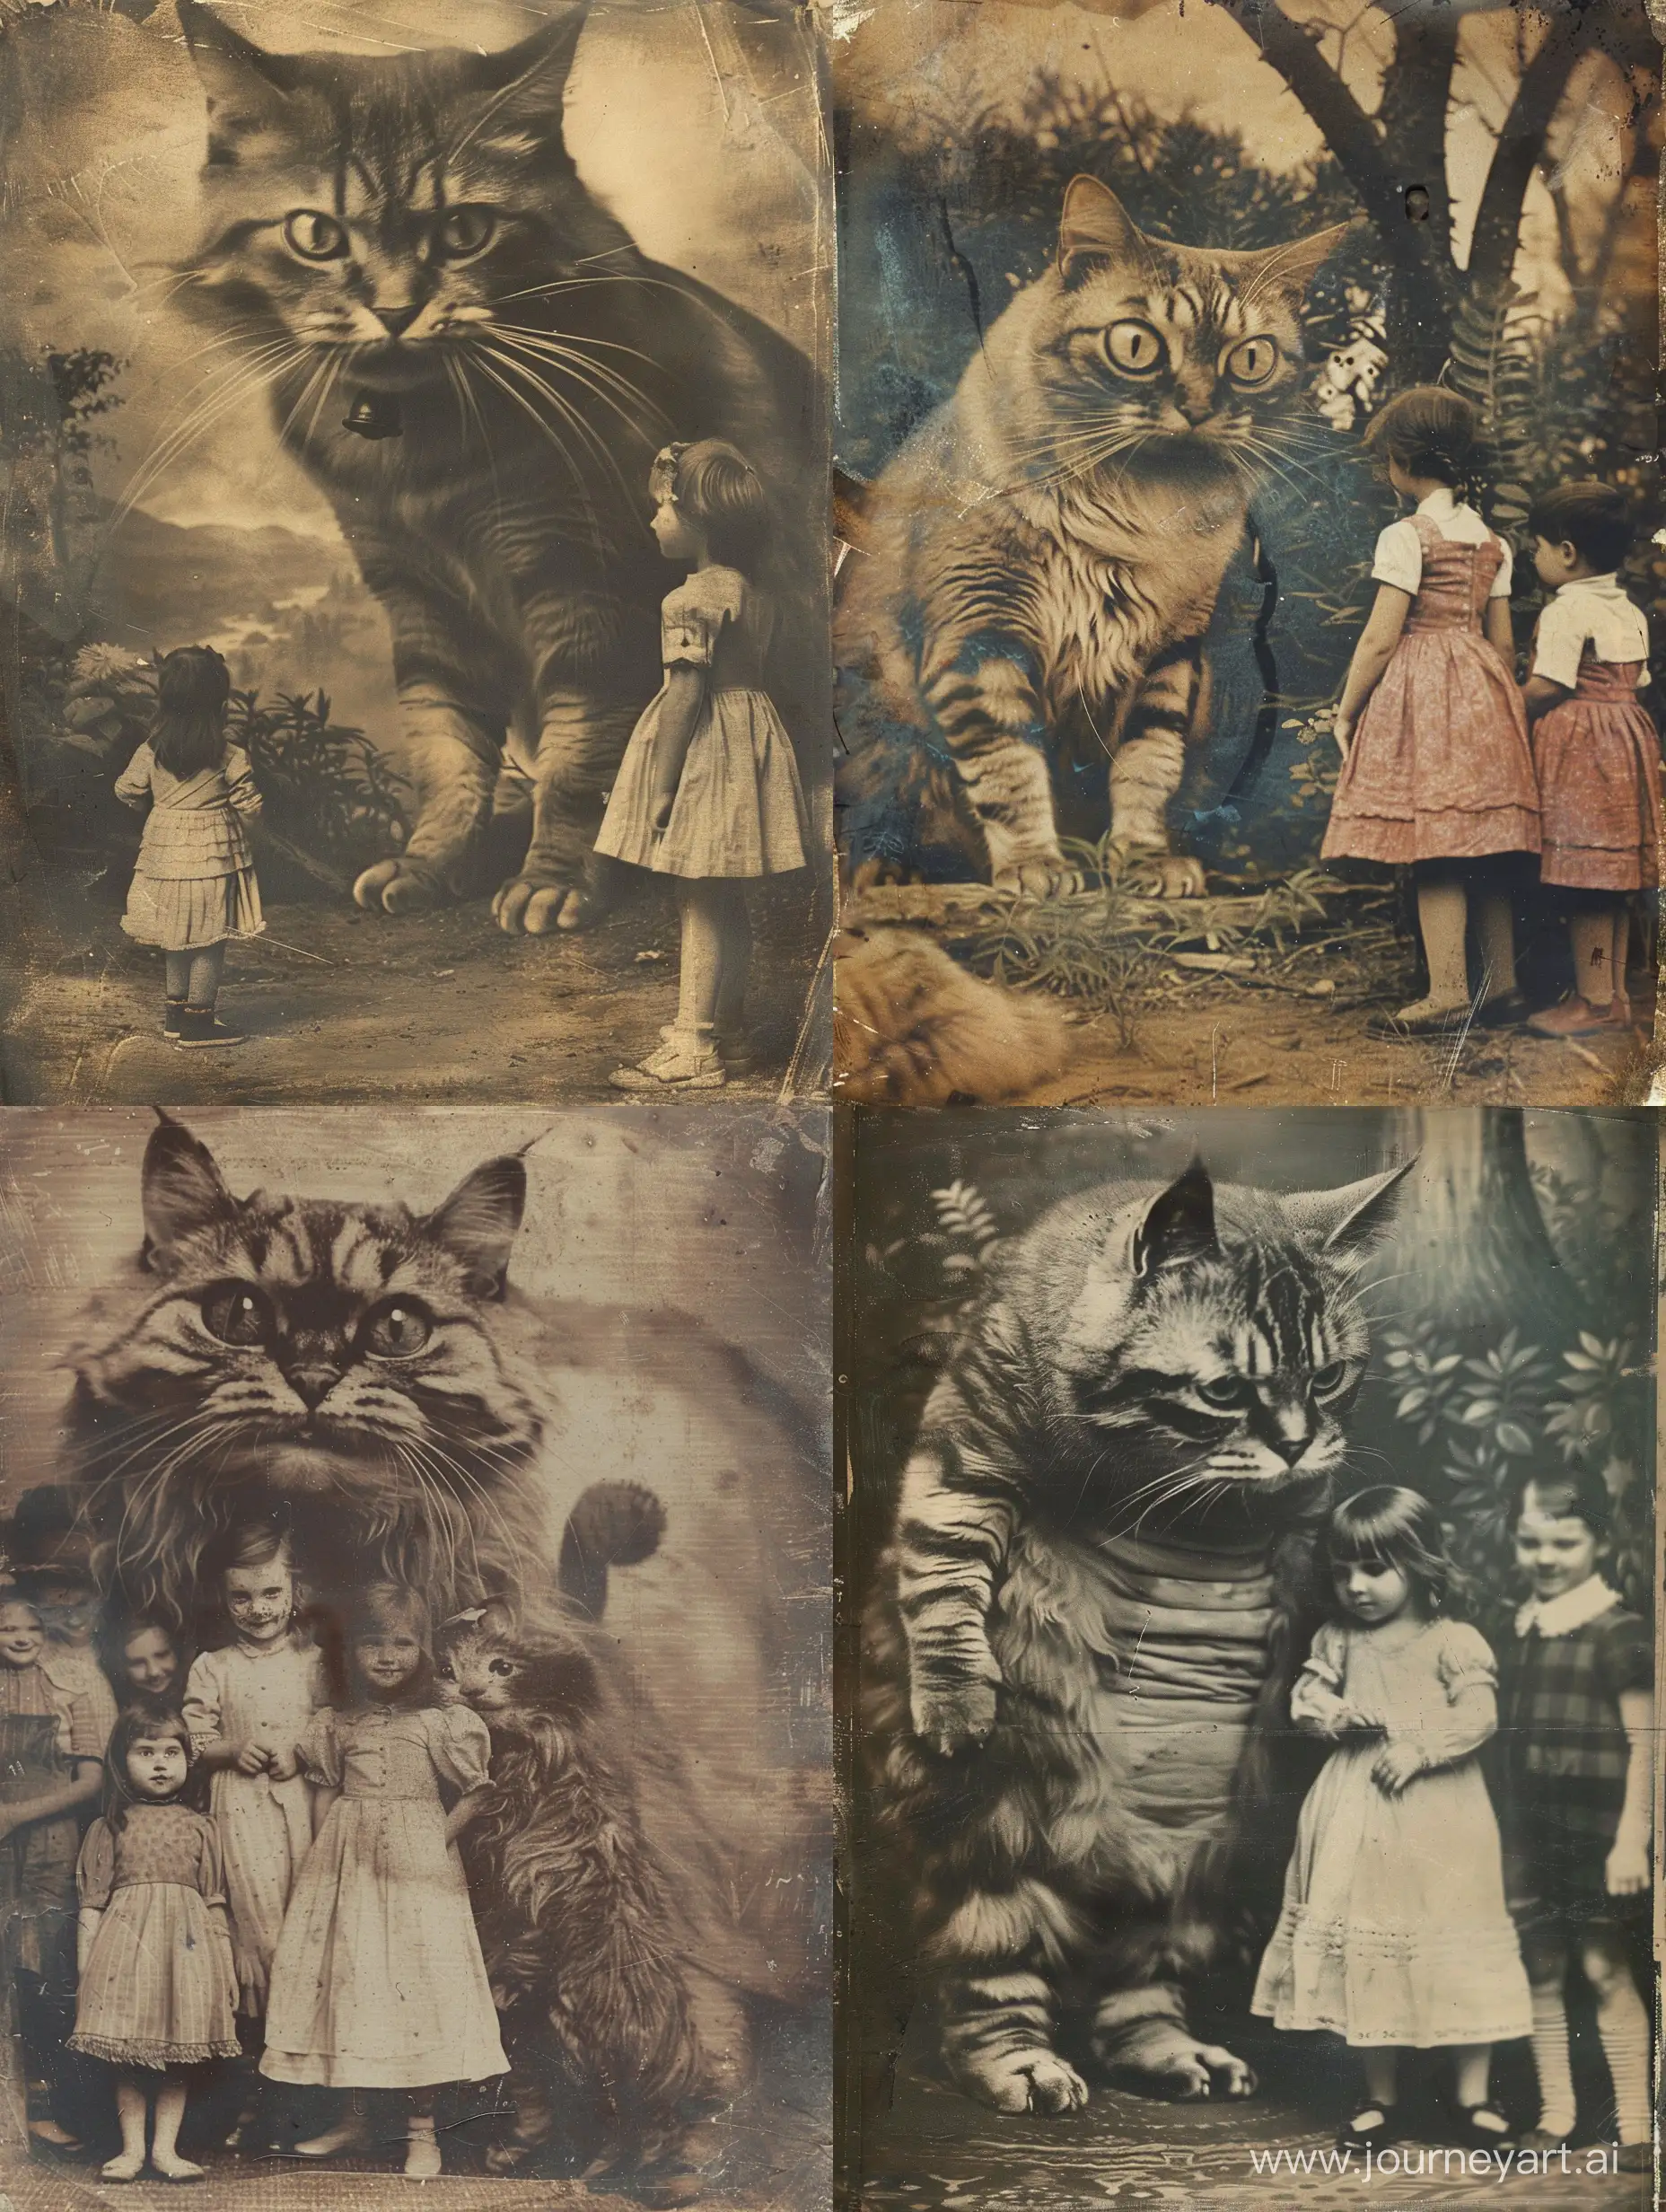 the cheshire cat and children, in the style of retro filters, oversized objects, demonic photograph, primitive folk art, furry art, made of cardboard, soft, dreamy scenes, expired 35mm film